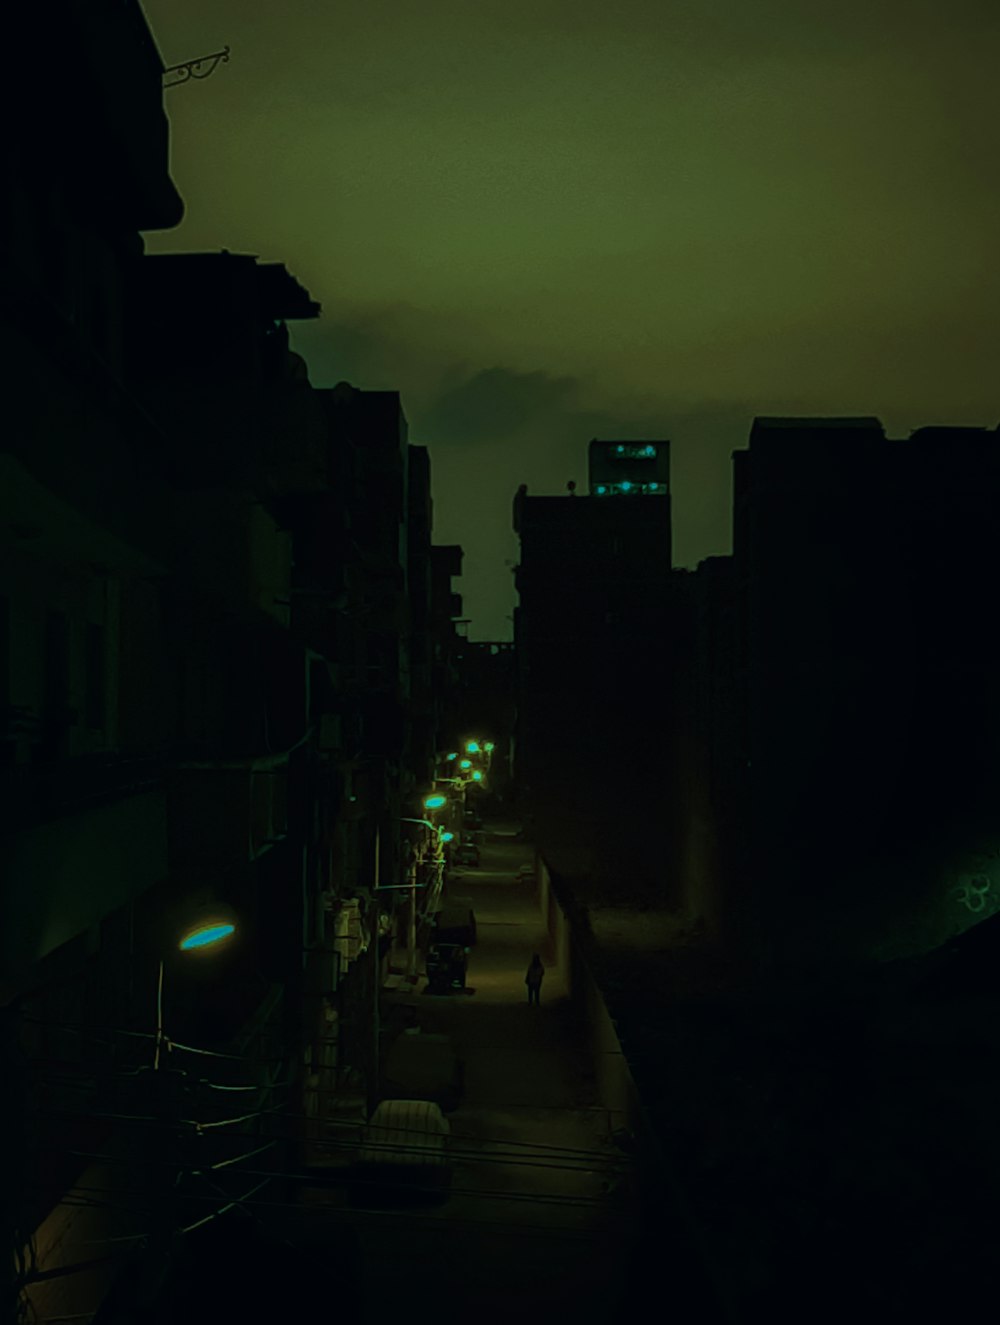 a dark city street at night with buildings lit up